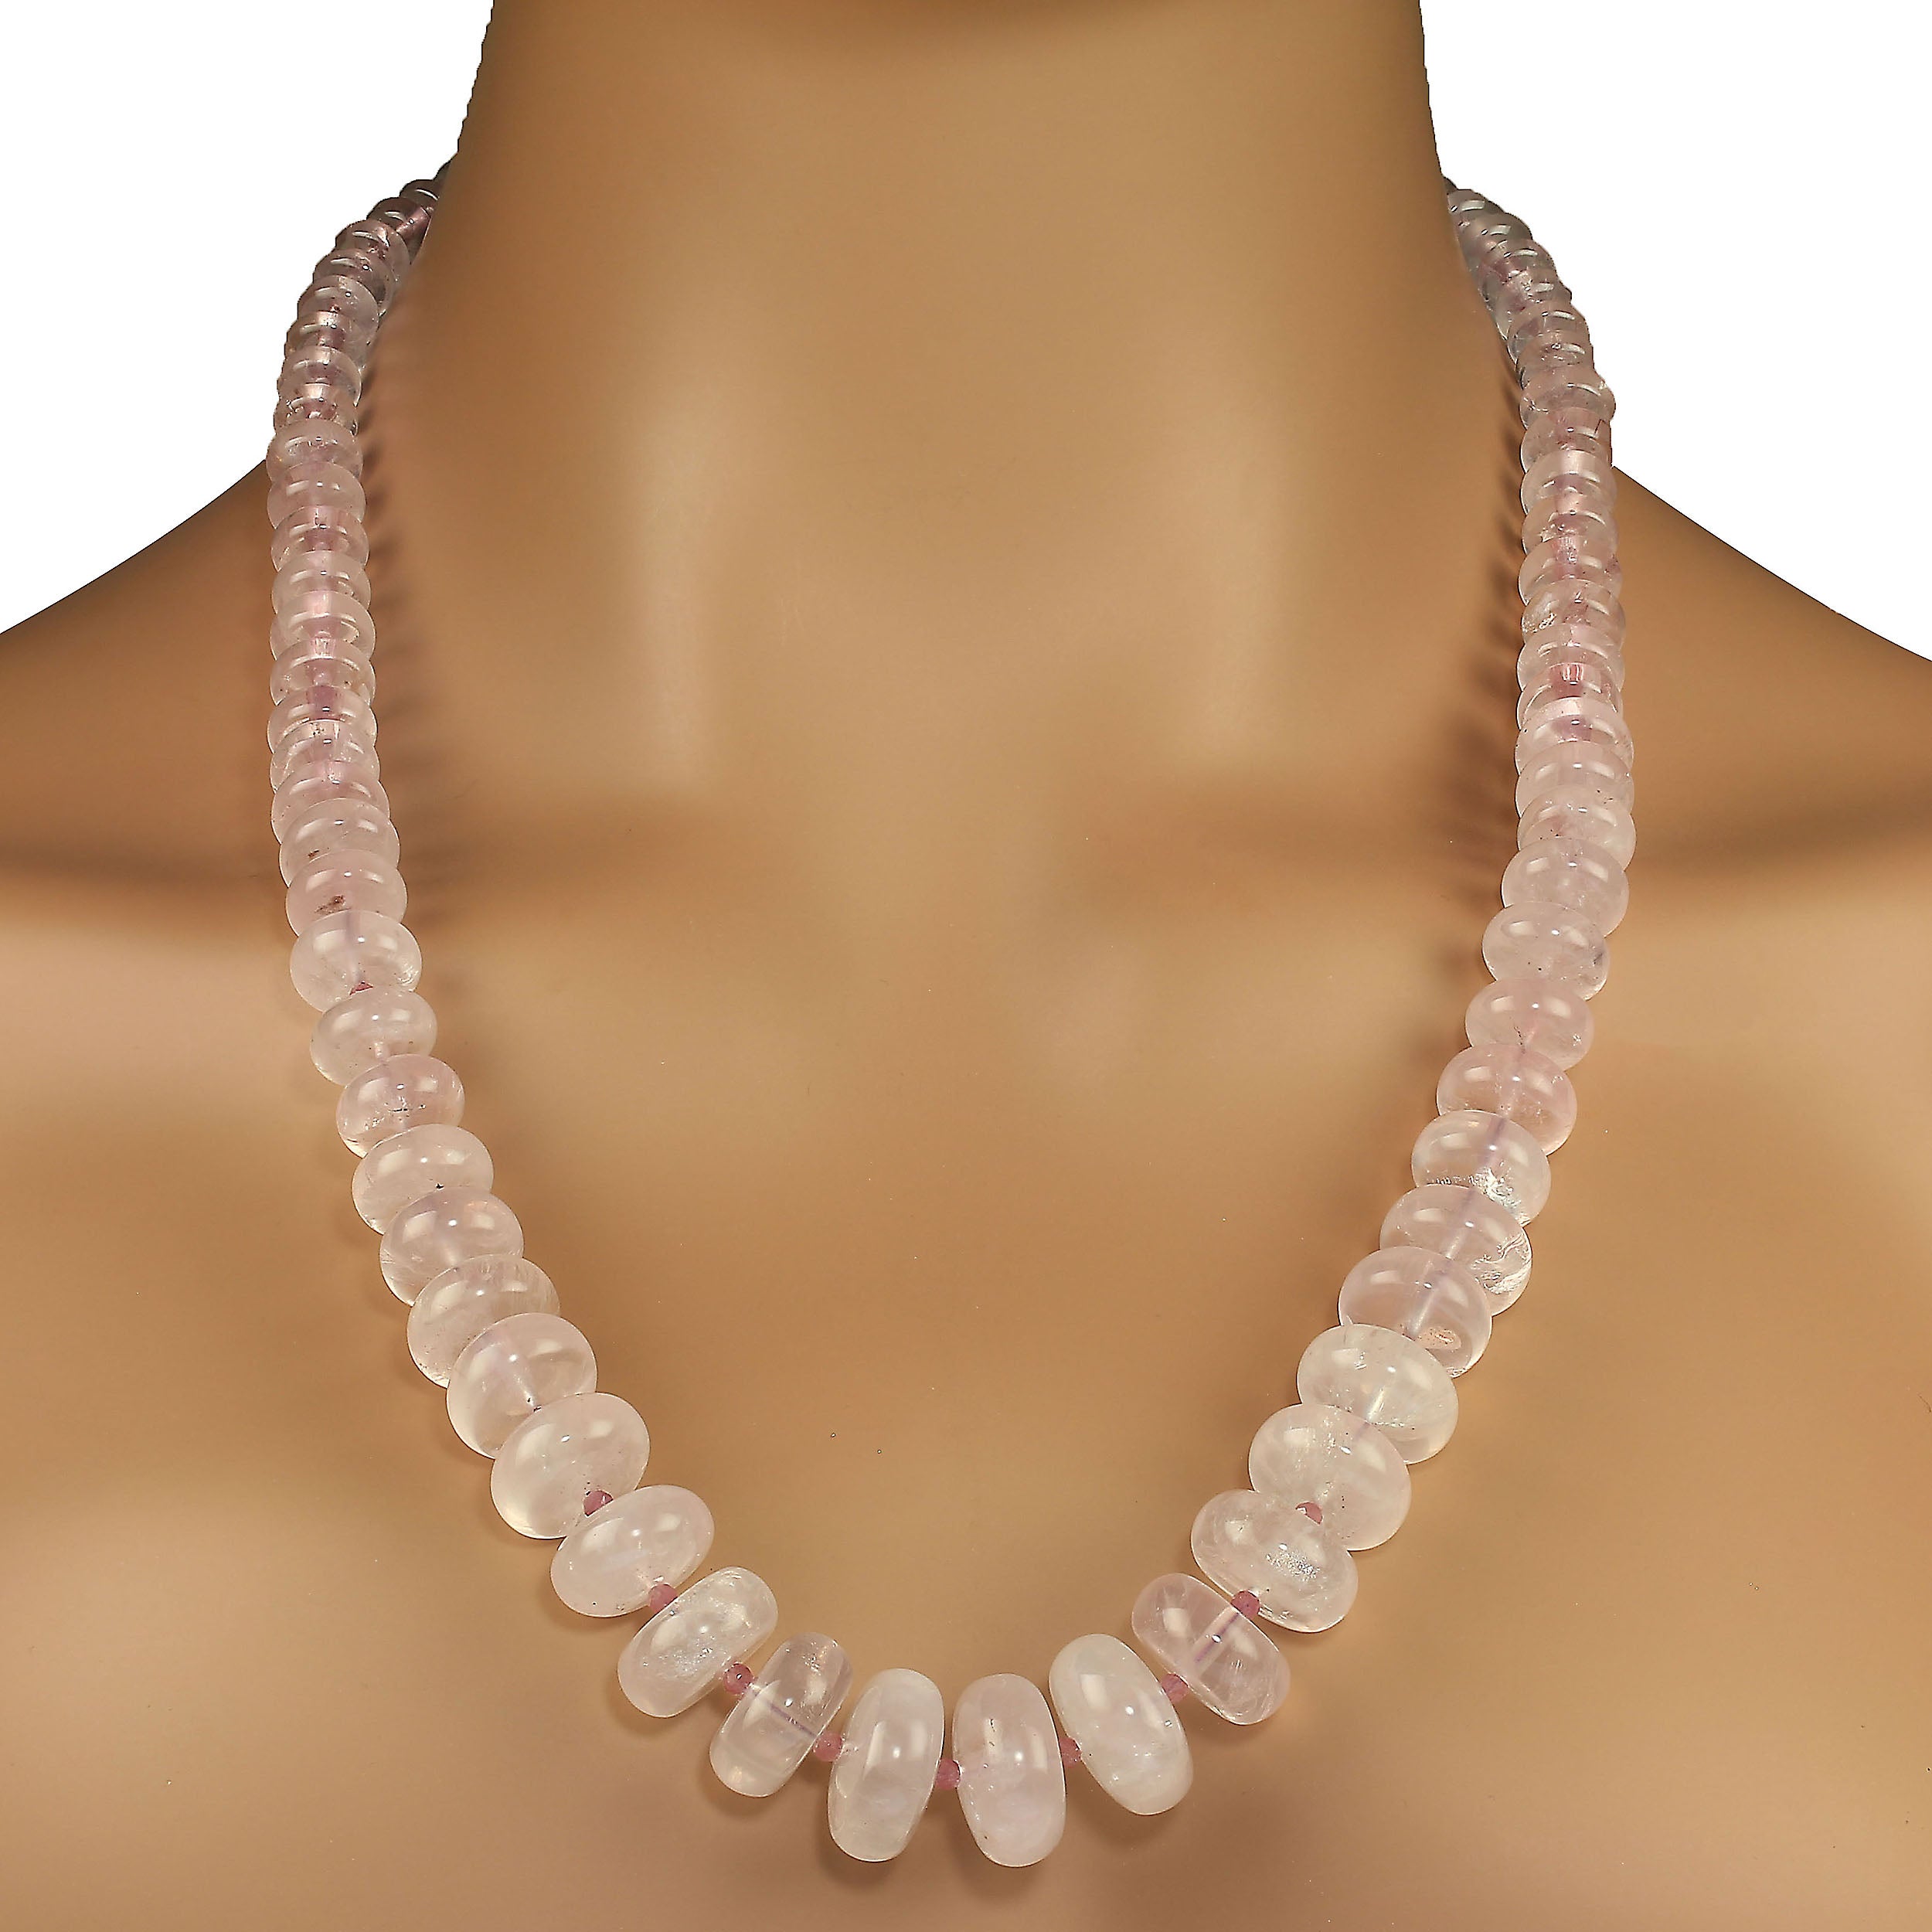 AJD 24 Inch Graduated Rose Quartz Necklace Perfect Valentine's Day Gift!